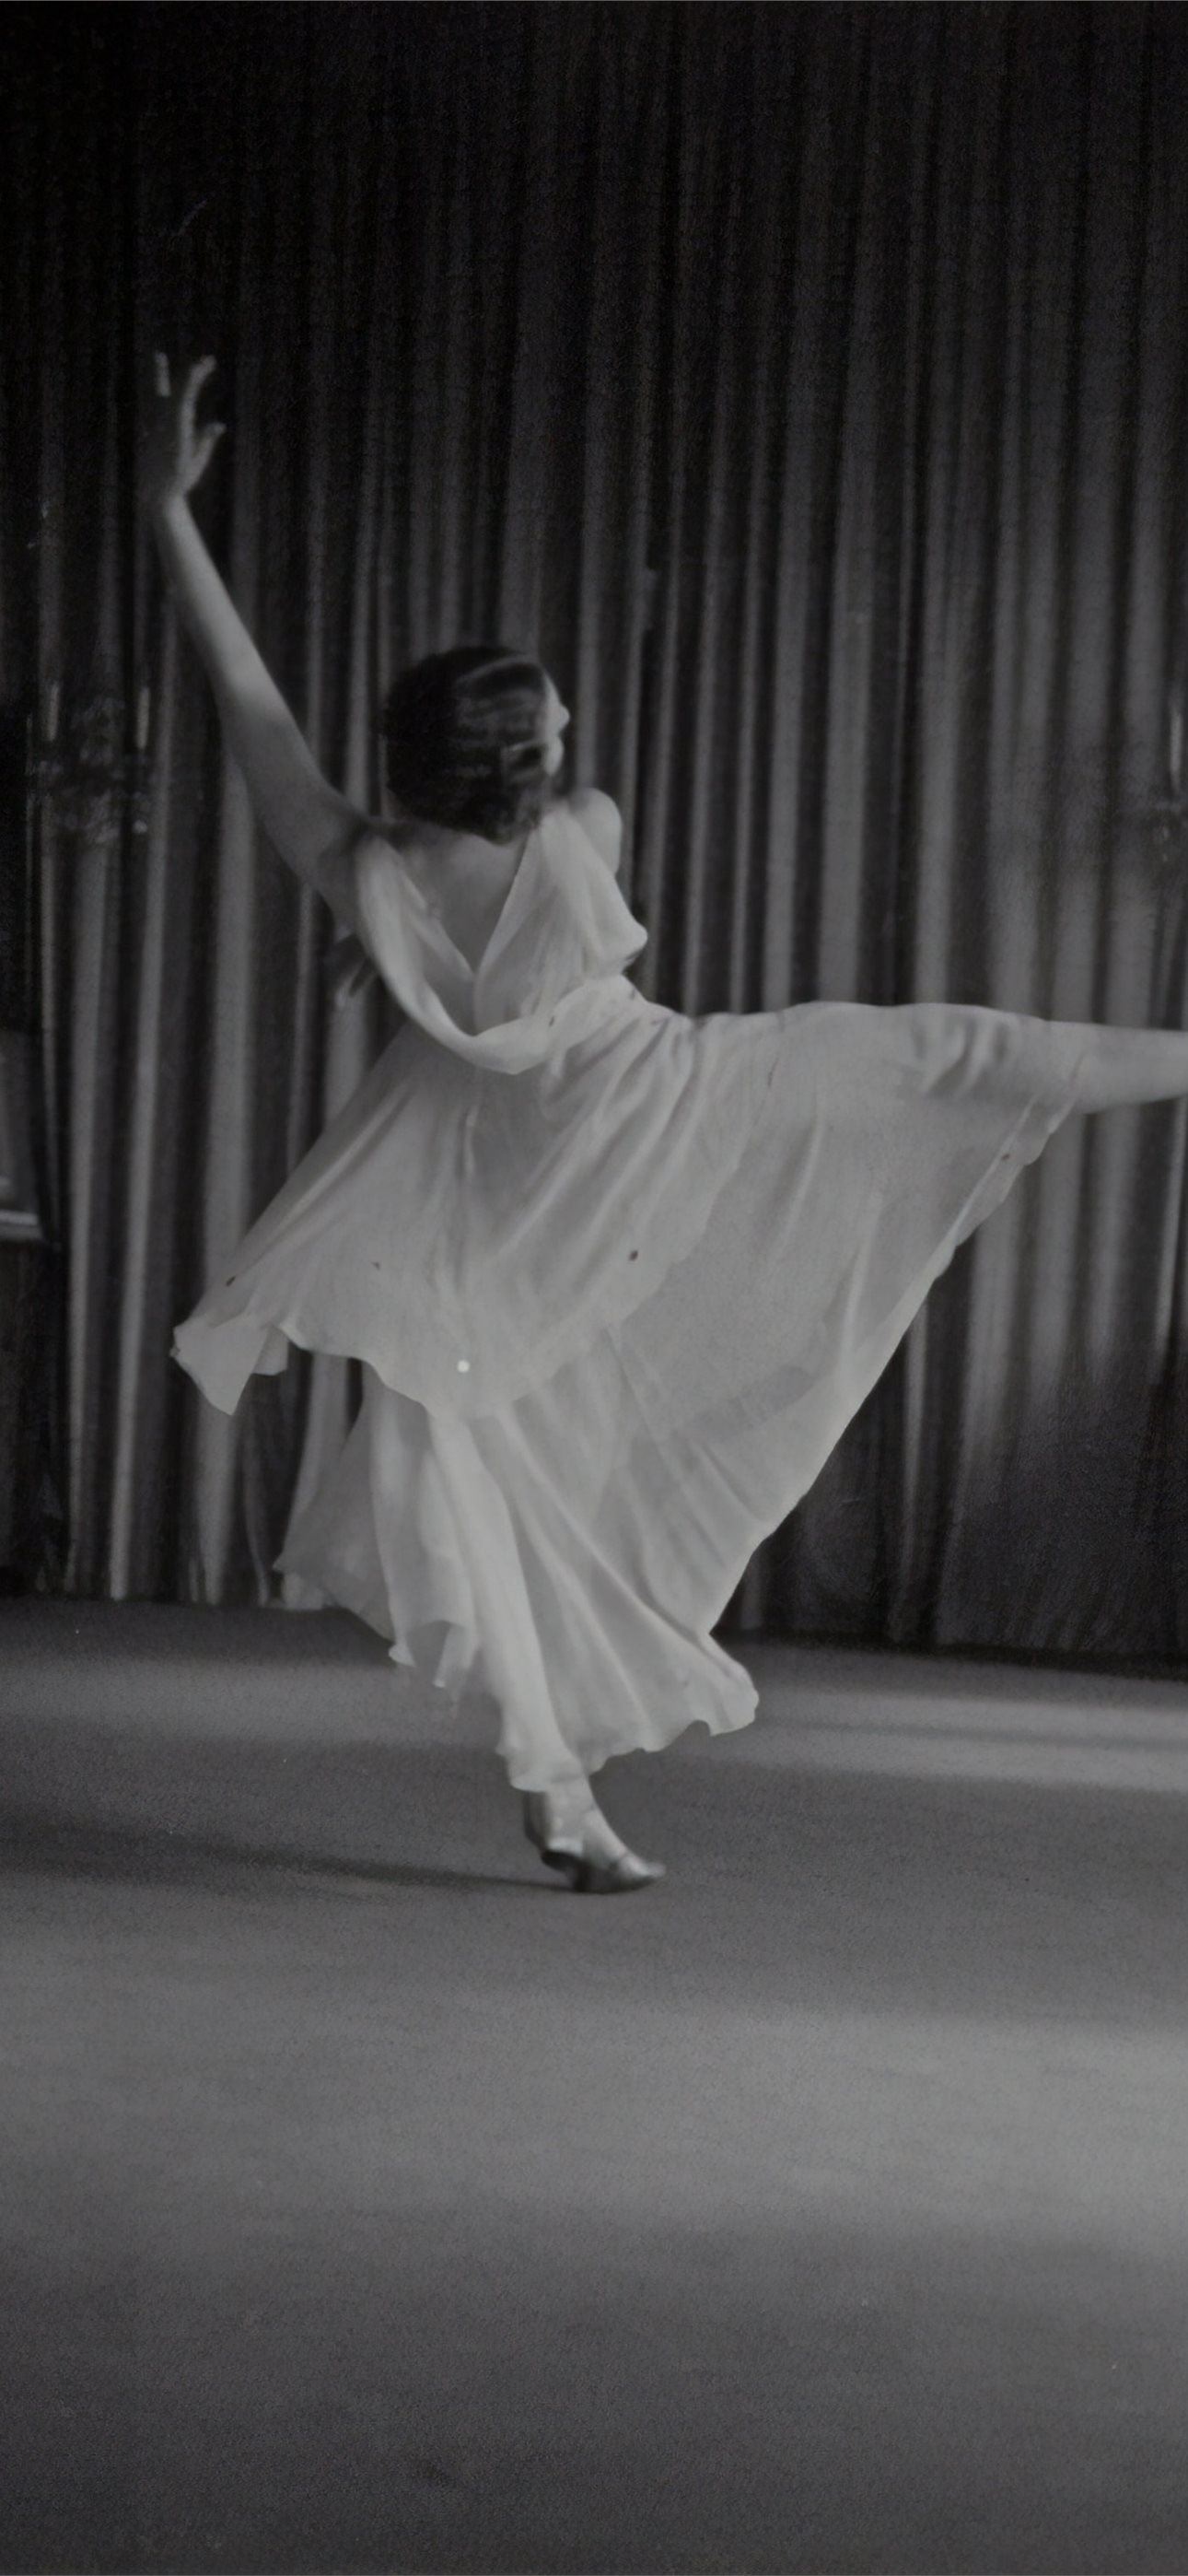 grayscale photo of woman dancing near curtains iPhone Wallpaper Free Download